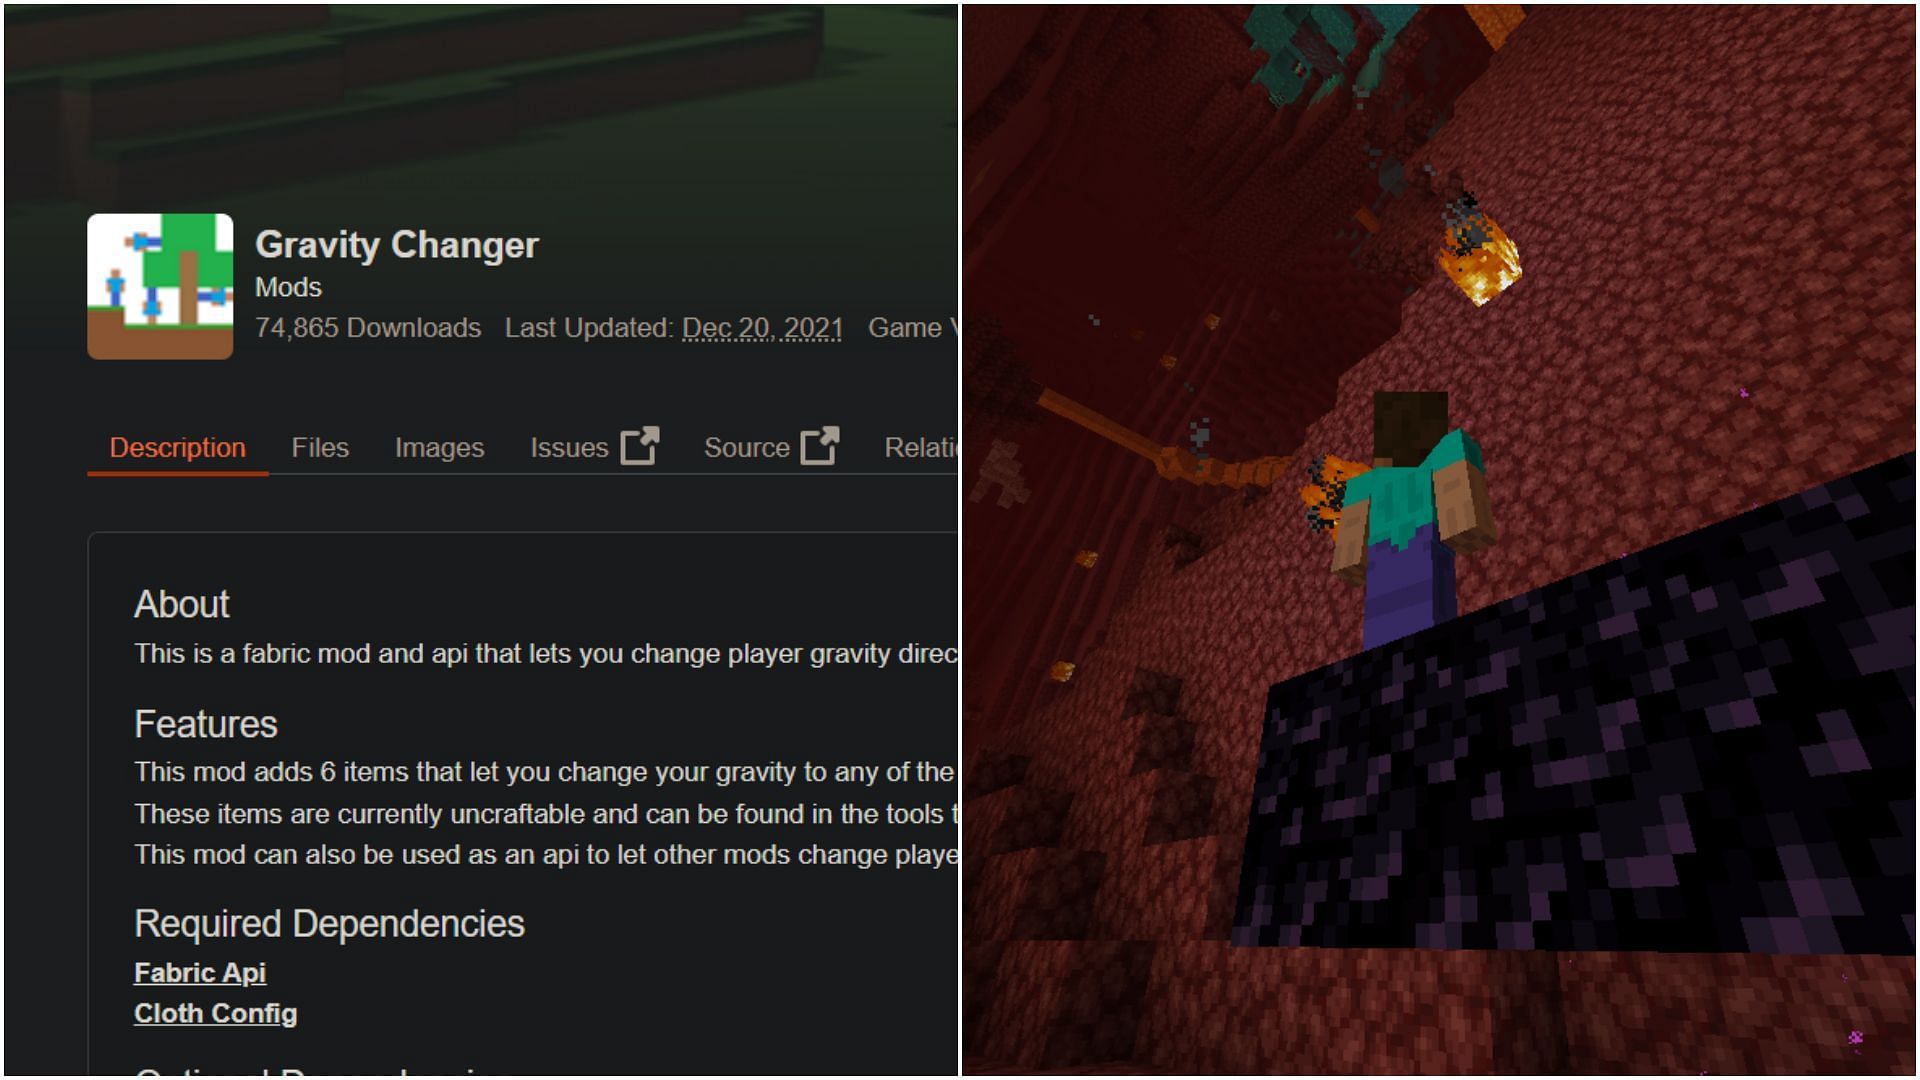 Gravity Changer is a great, fun-filled mod that changes the gravity